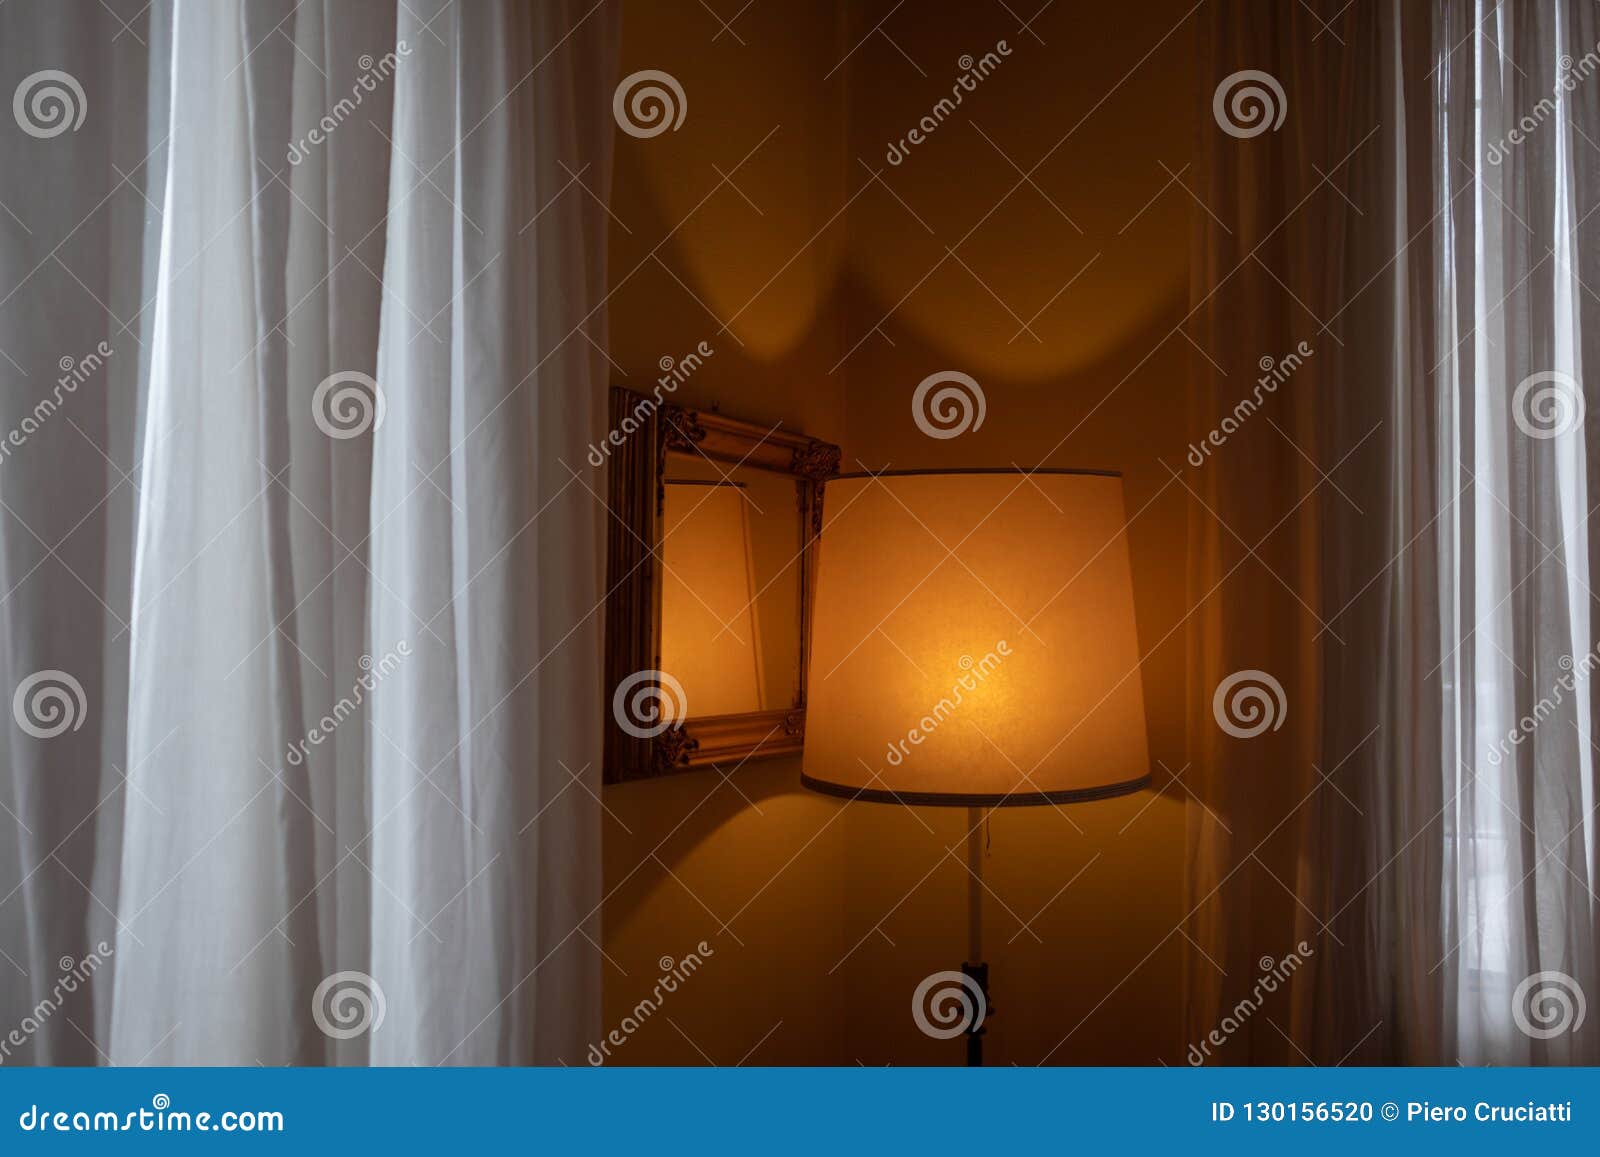 hotel room with orange lit abat-jour, framed mirror and white curtains